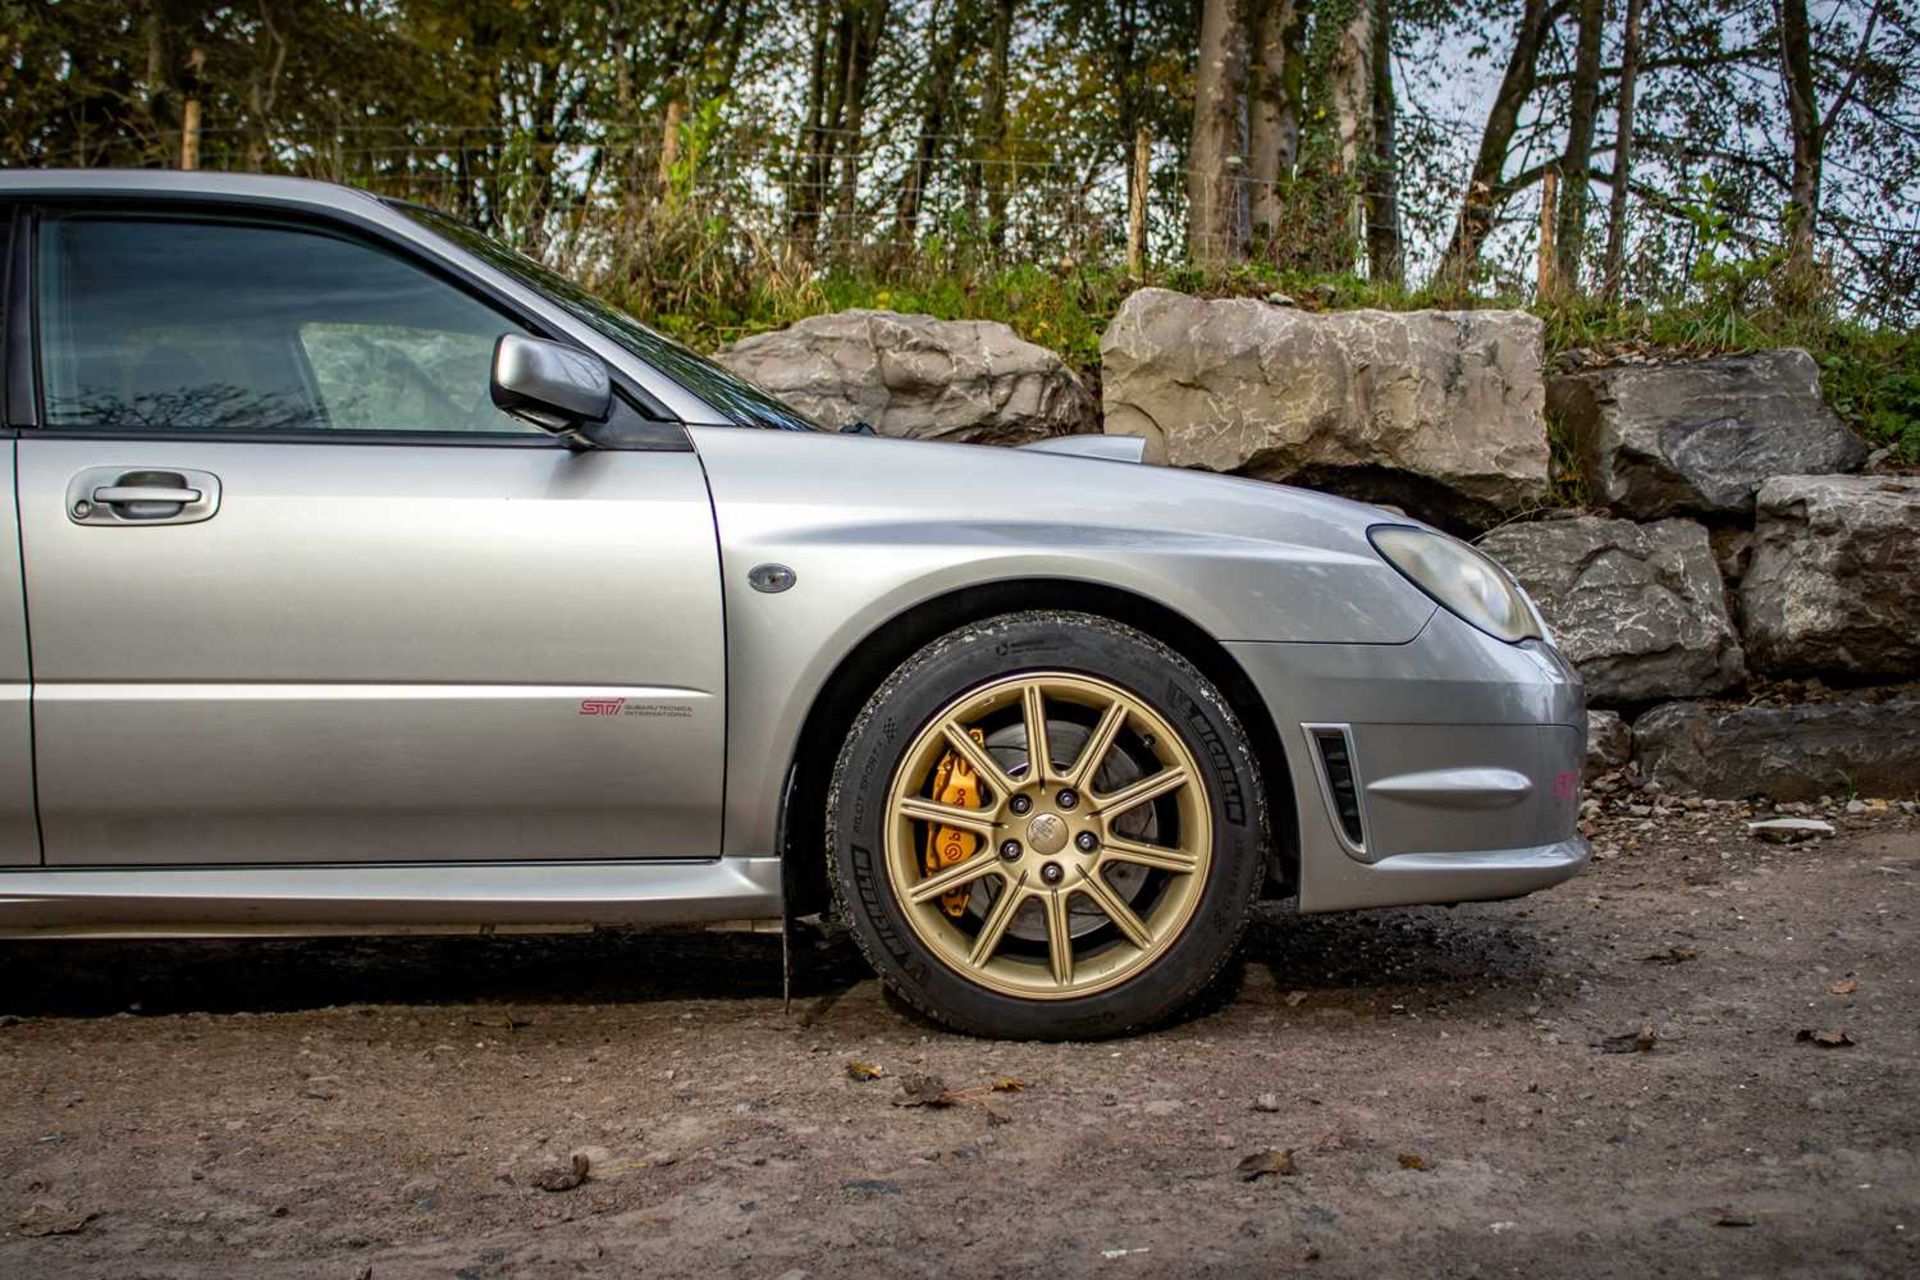 2006 Subaru Impreza WRX STi Featuring a plethora of desirable upgrades, supported by a dyno printout - Image 26 of 103